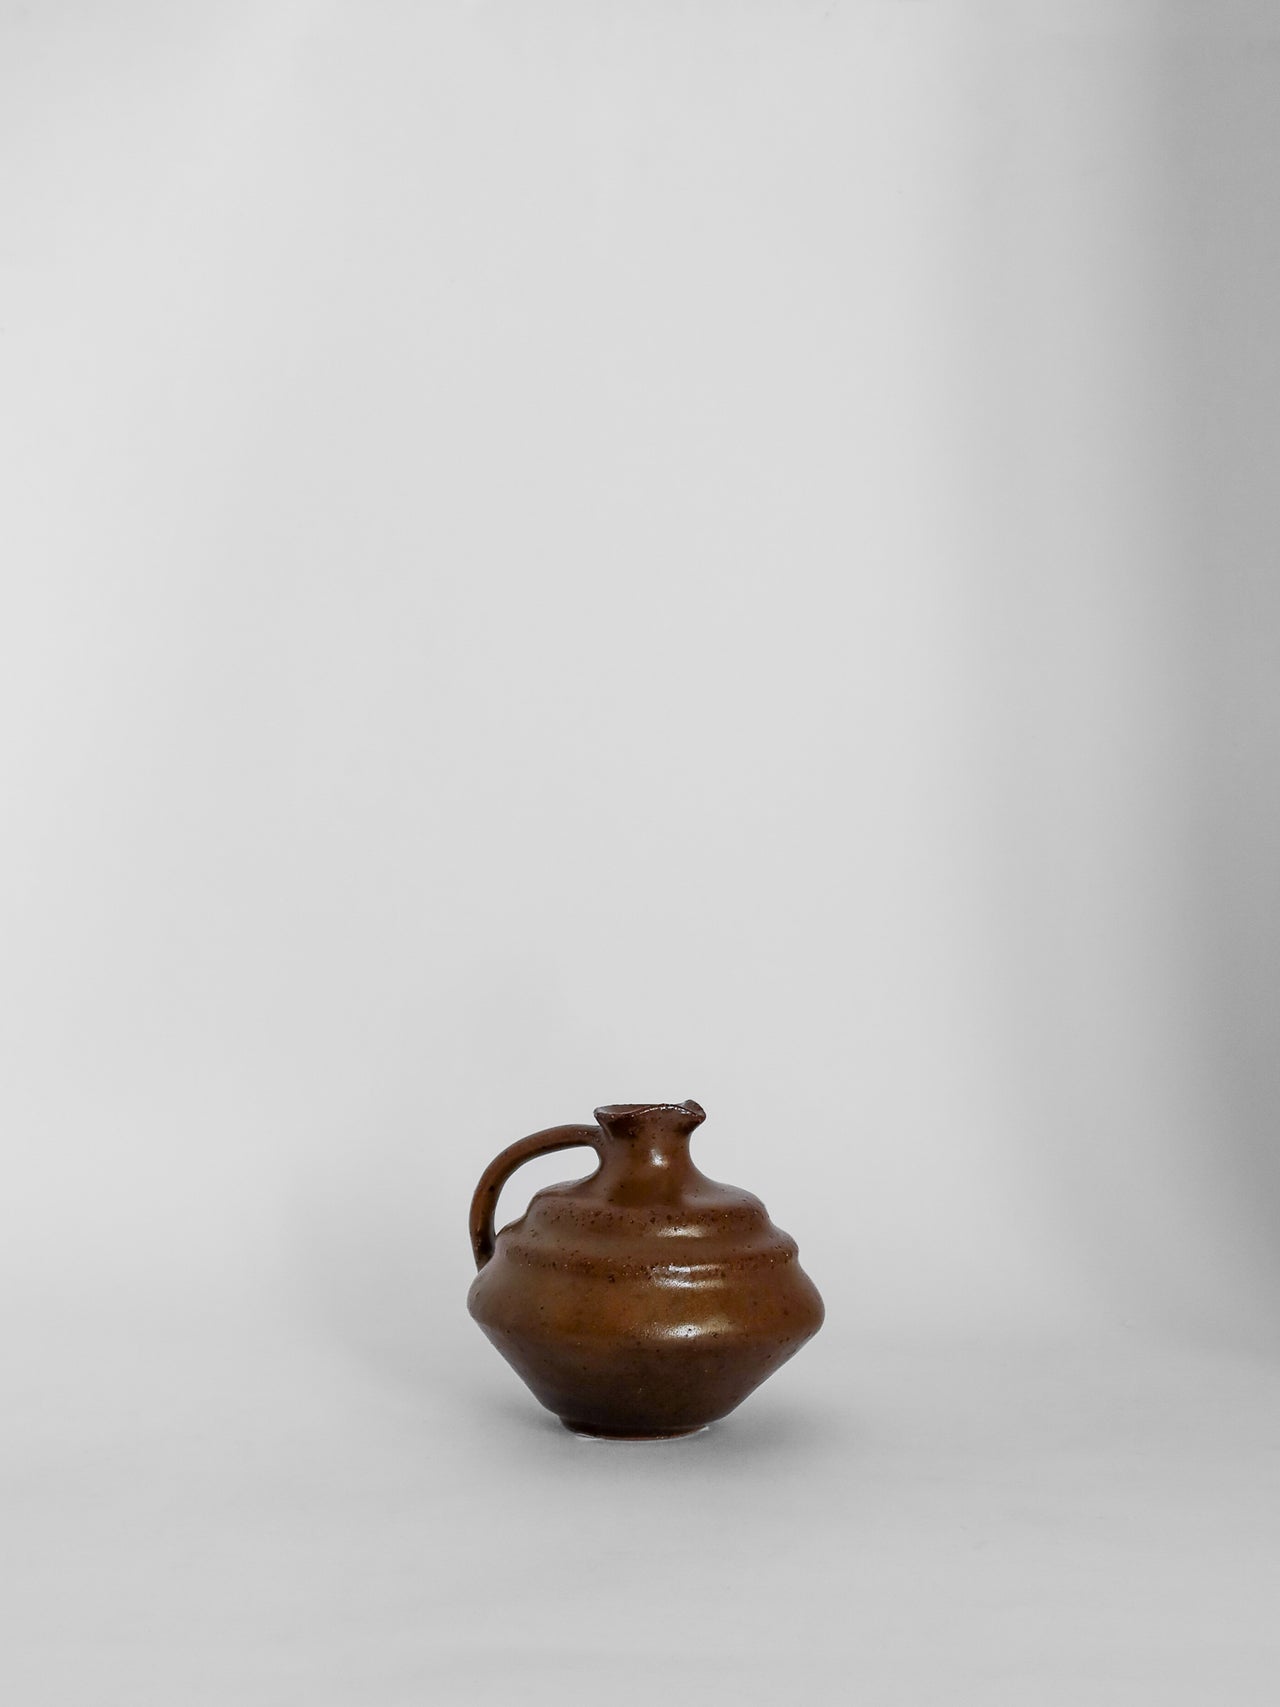 The-Lair-BRB-Ceramics-Extra-Small-Vase-Golden-Brown-001